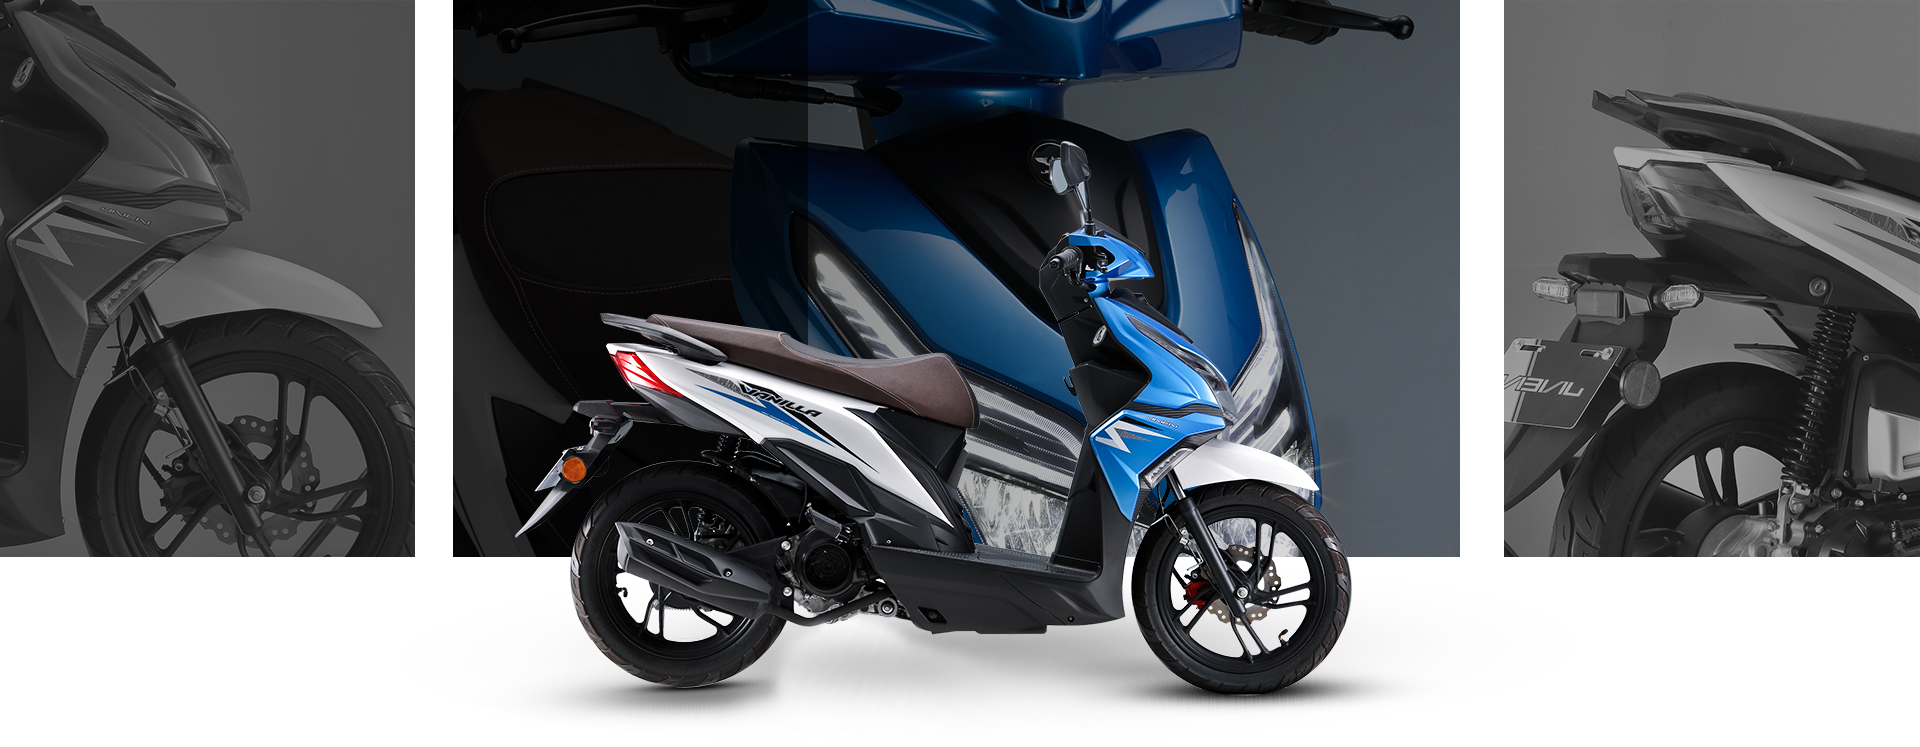 Long Journey Cruiser Scooters: The Perfect Balance of Power, Endurance, and Comfort